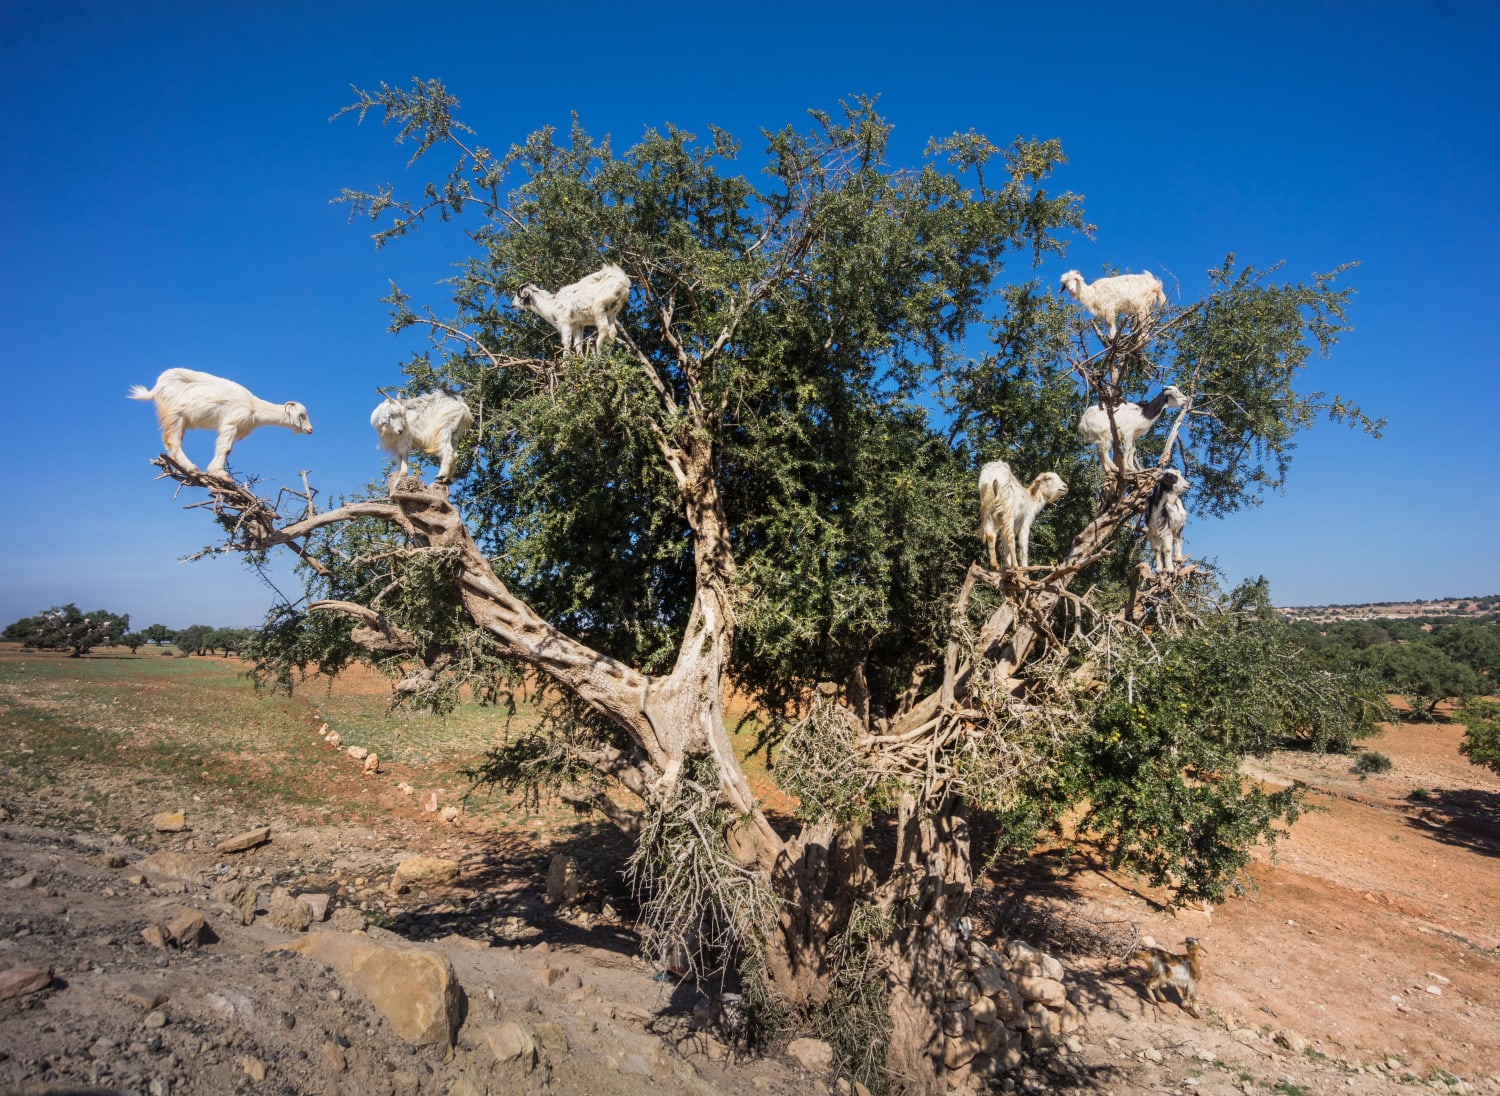 Goats in a Tree in Morocco